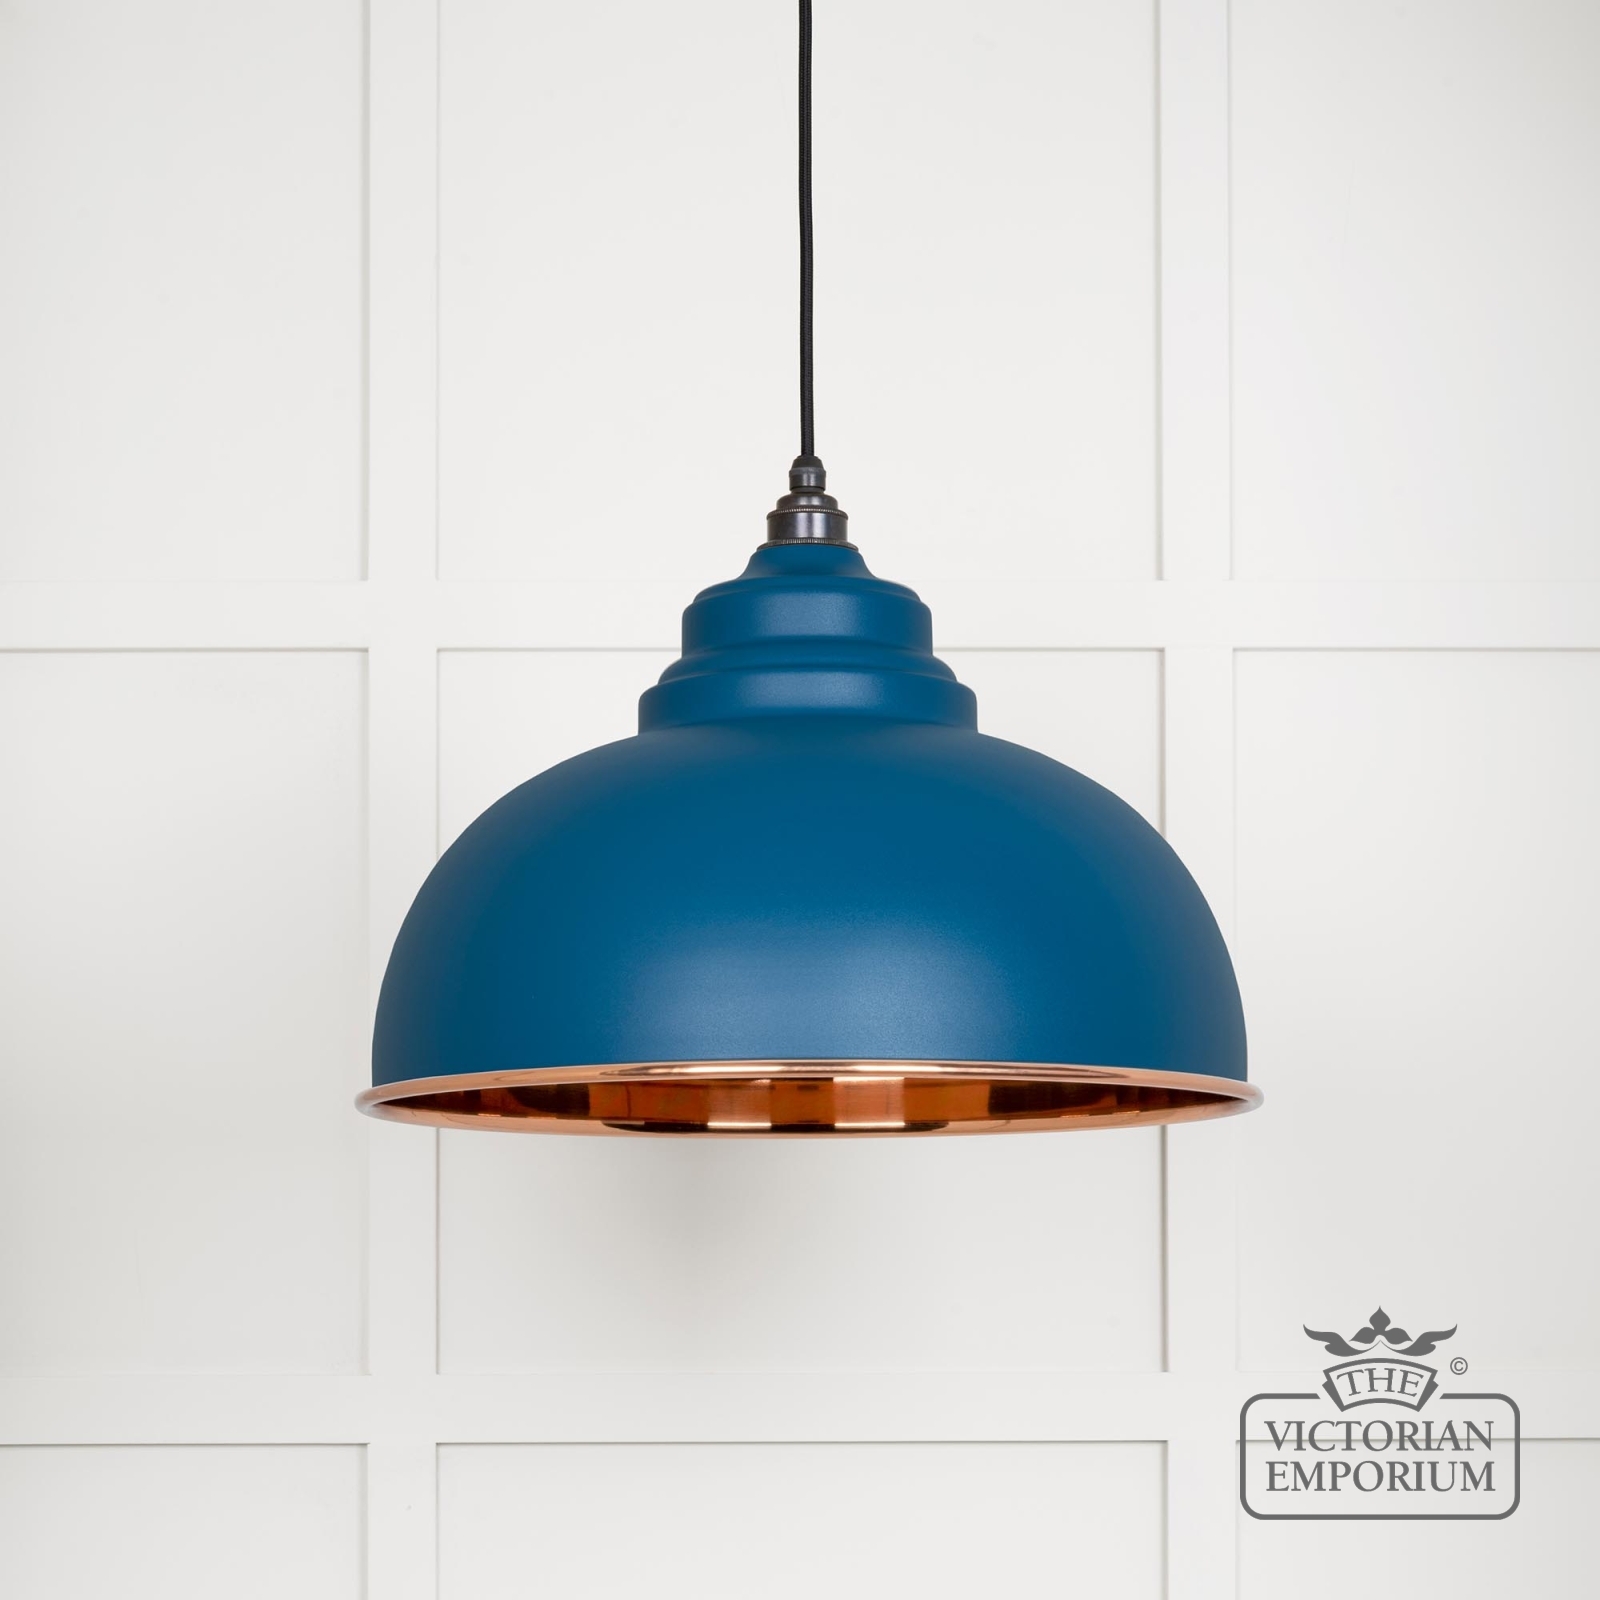 Harlow pendant light in smooth copper with Upstream exterior